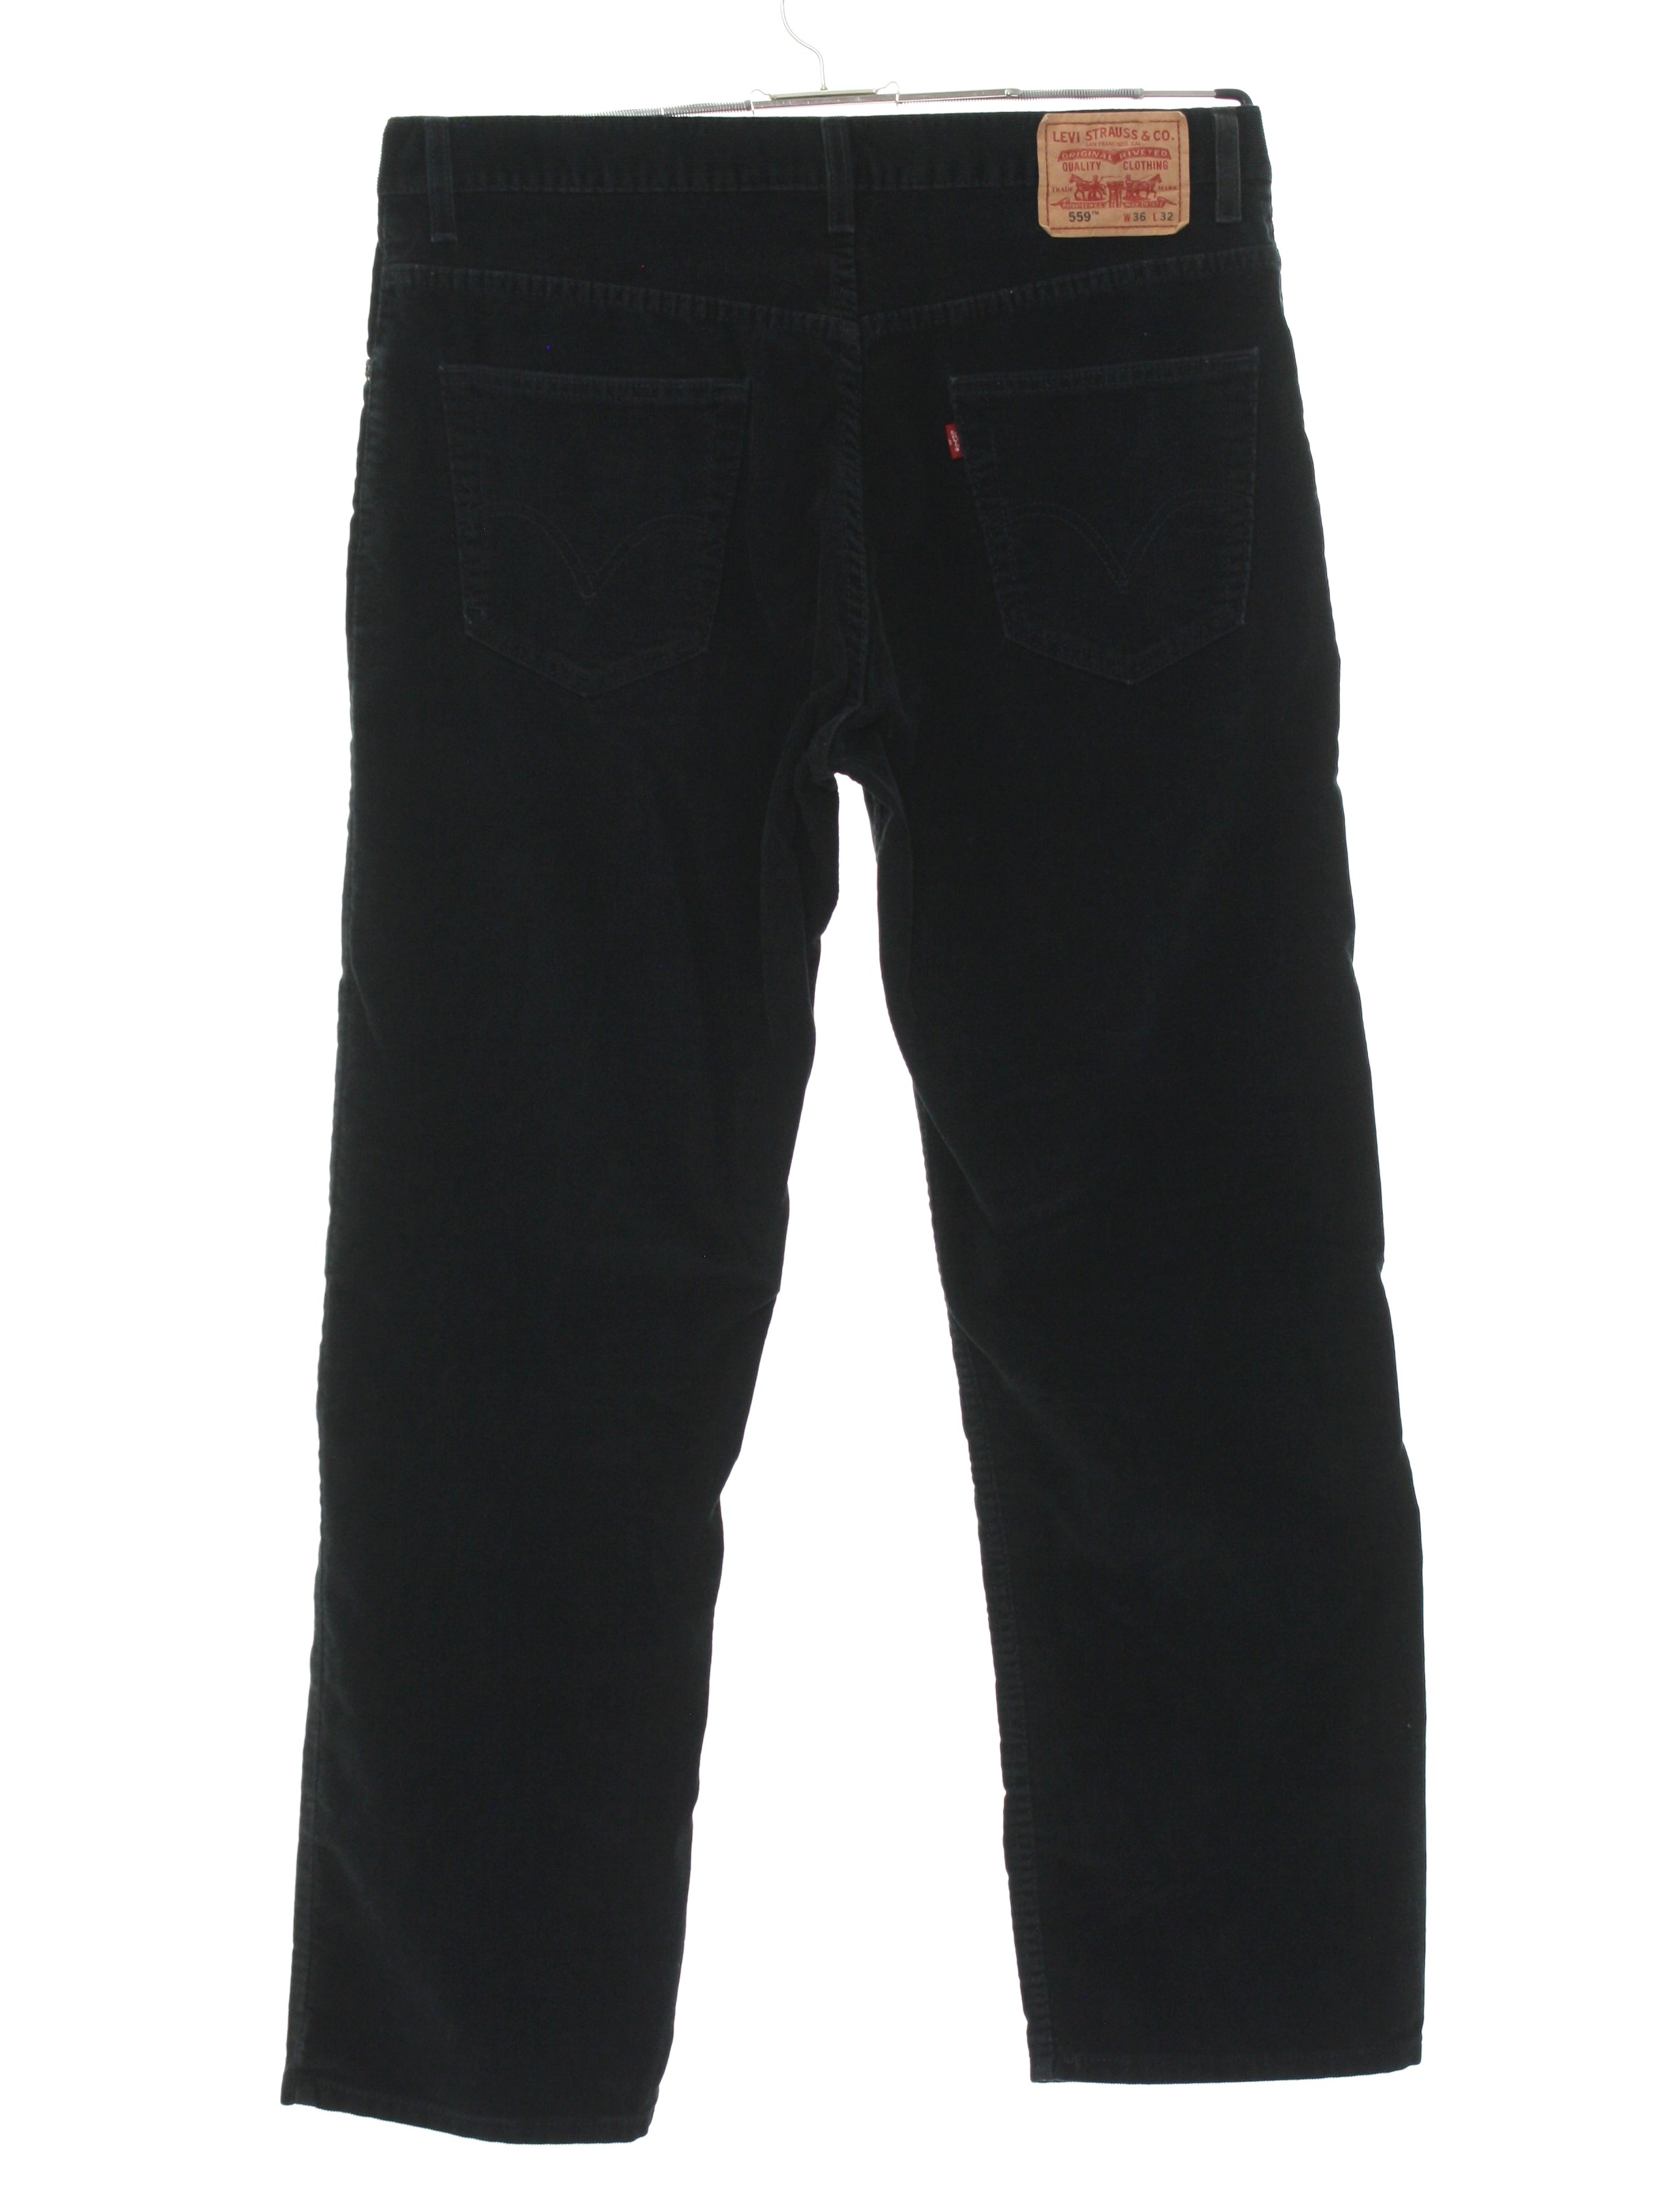 Pants: 90s -Levis 559- Mens black solid colored cotton polyester ...